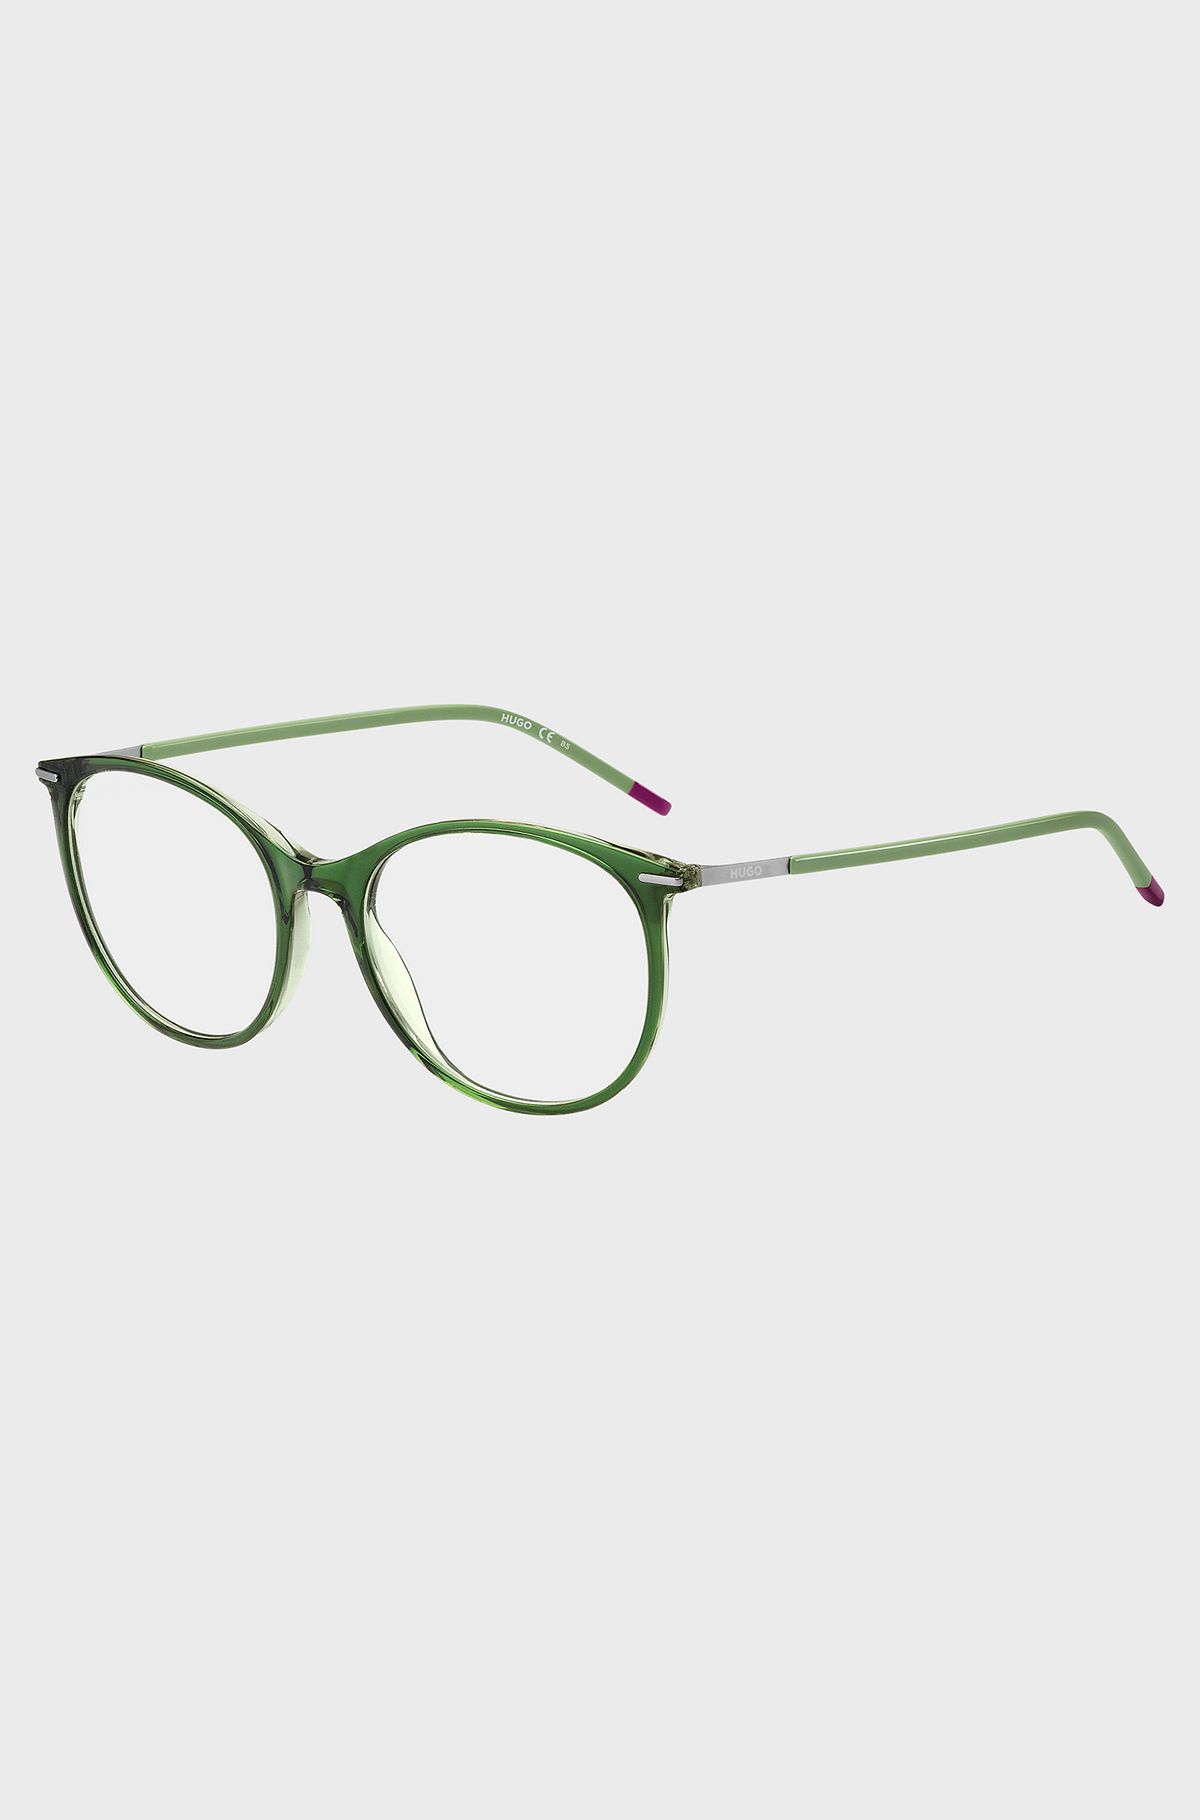 Green-acetate optical frames with stainless-steel temples, Green